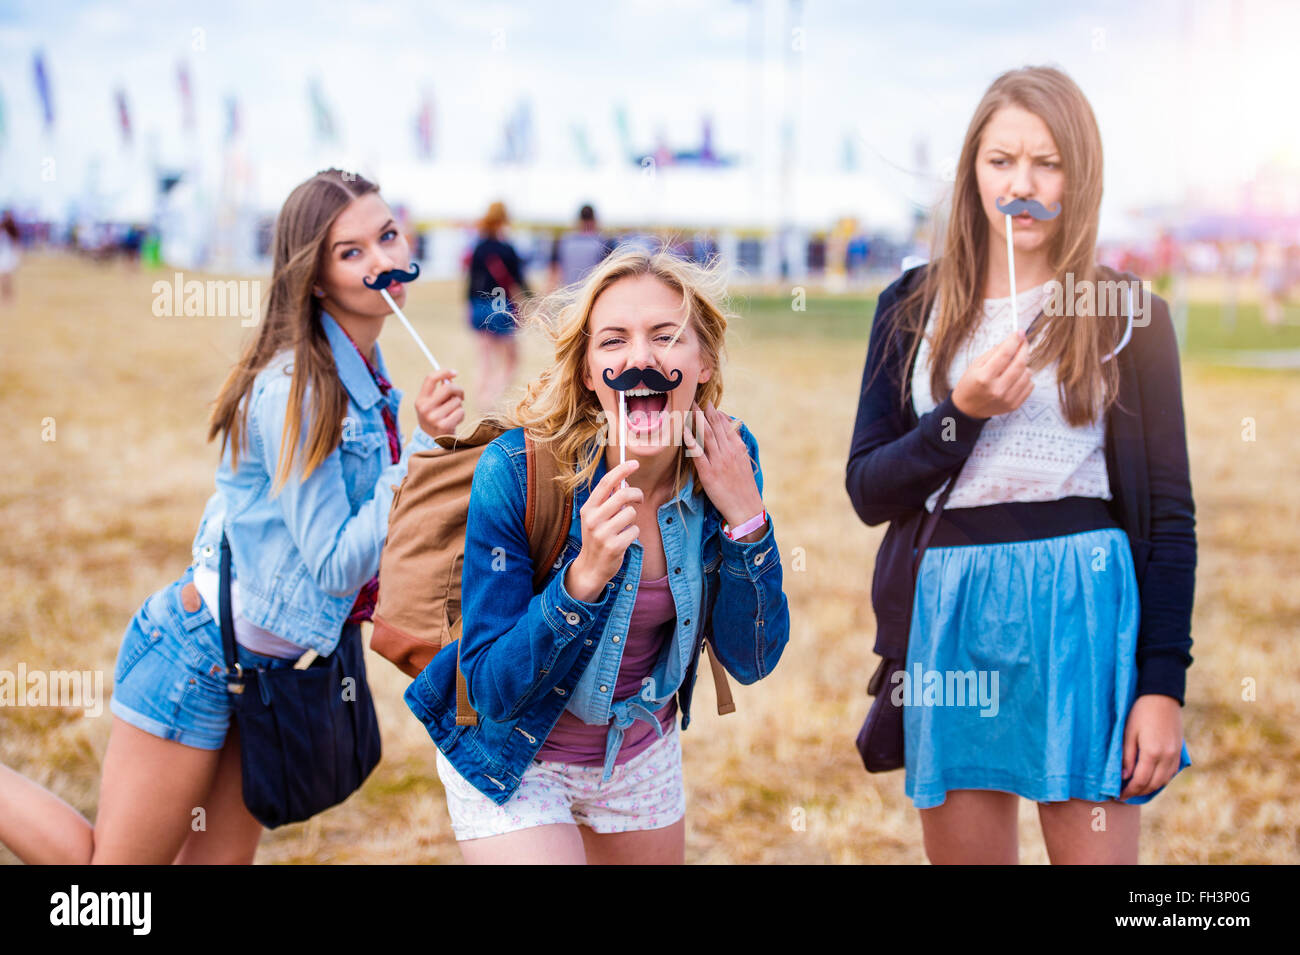 Teenage girls at summer festival with fake mustache Stock Photo